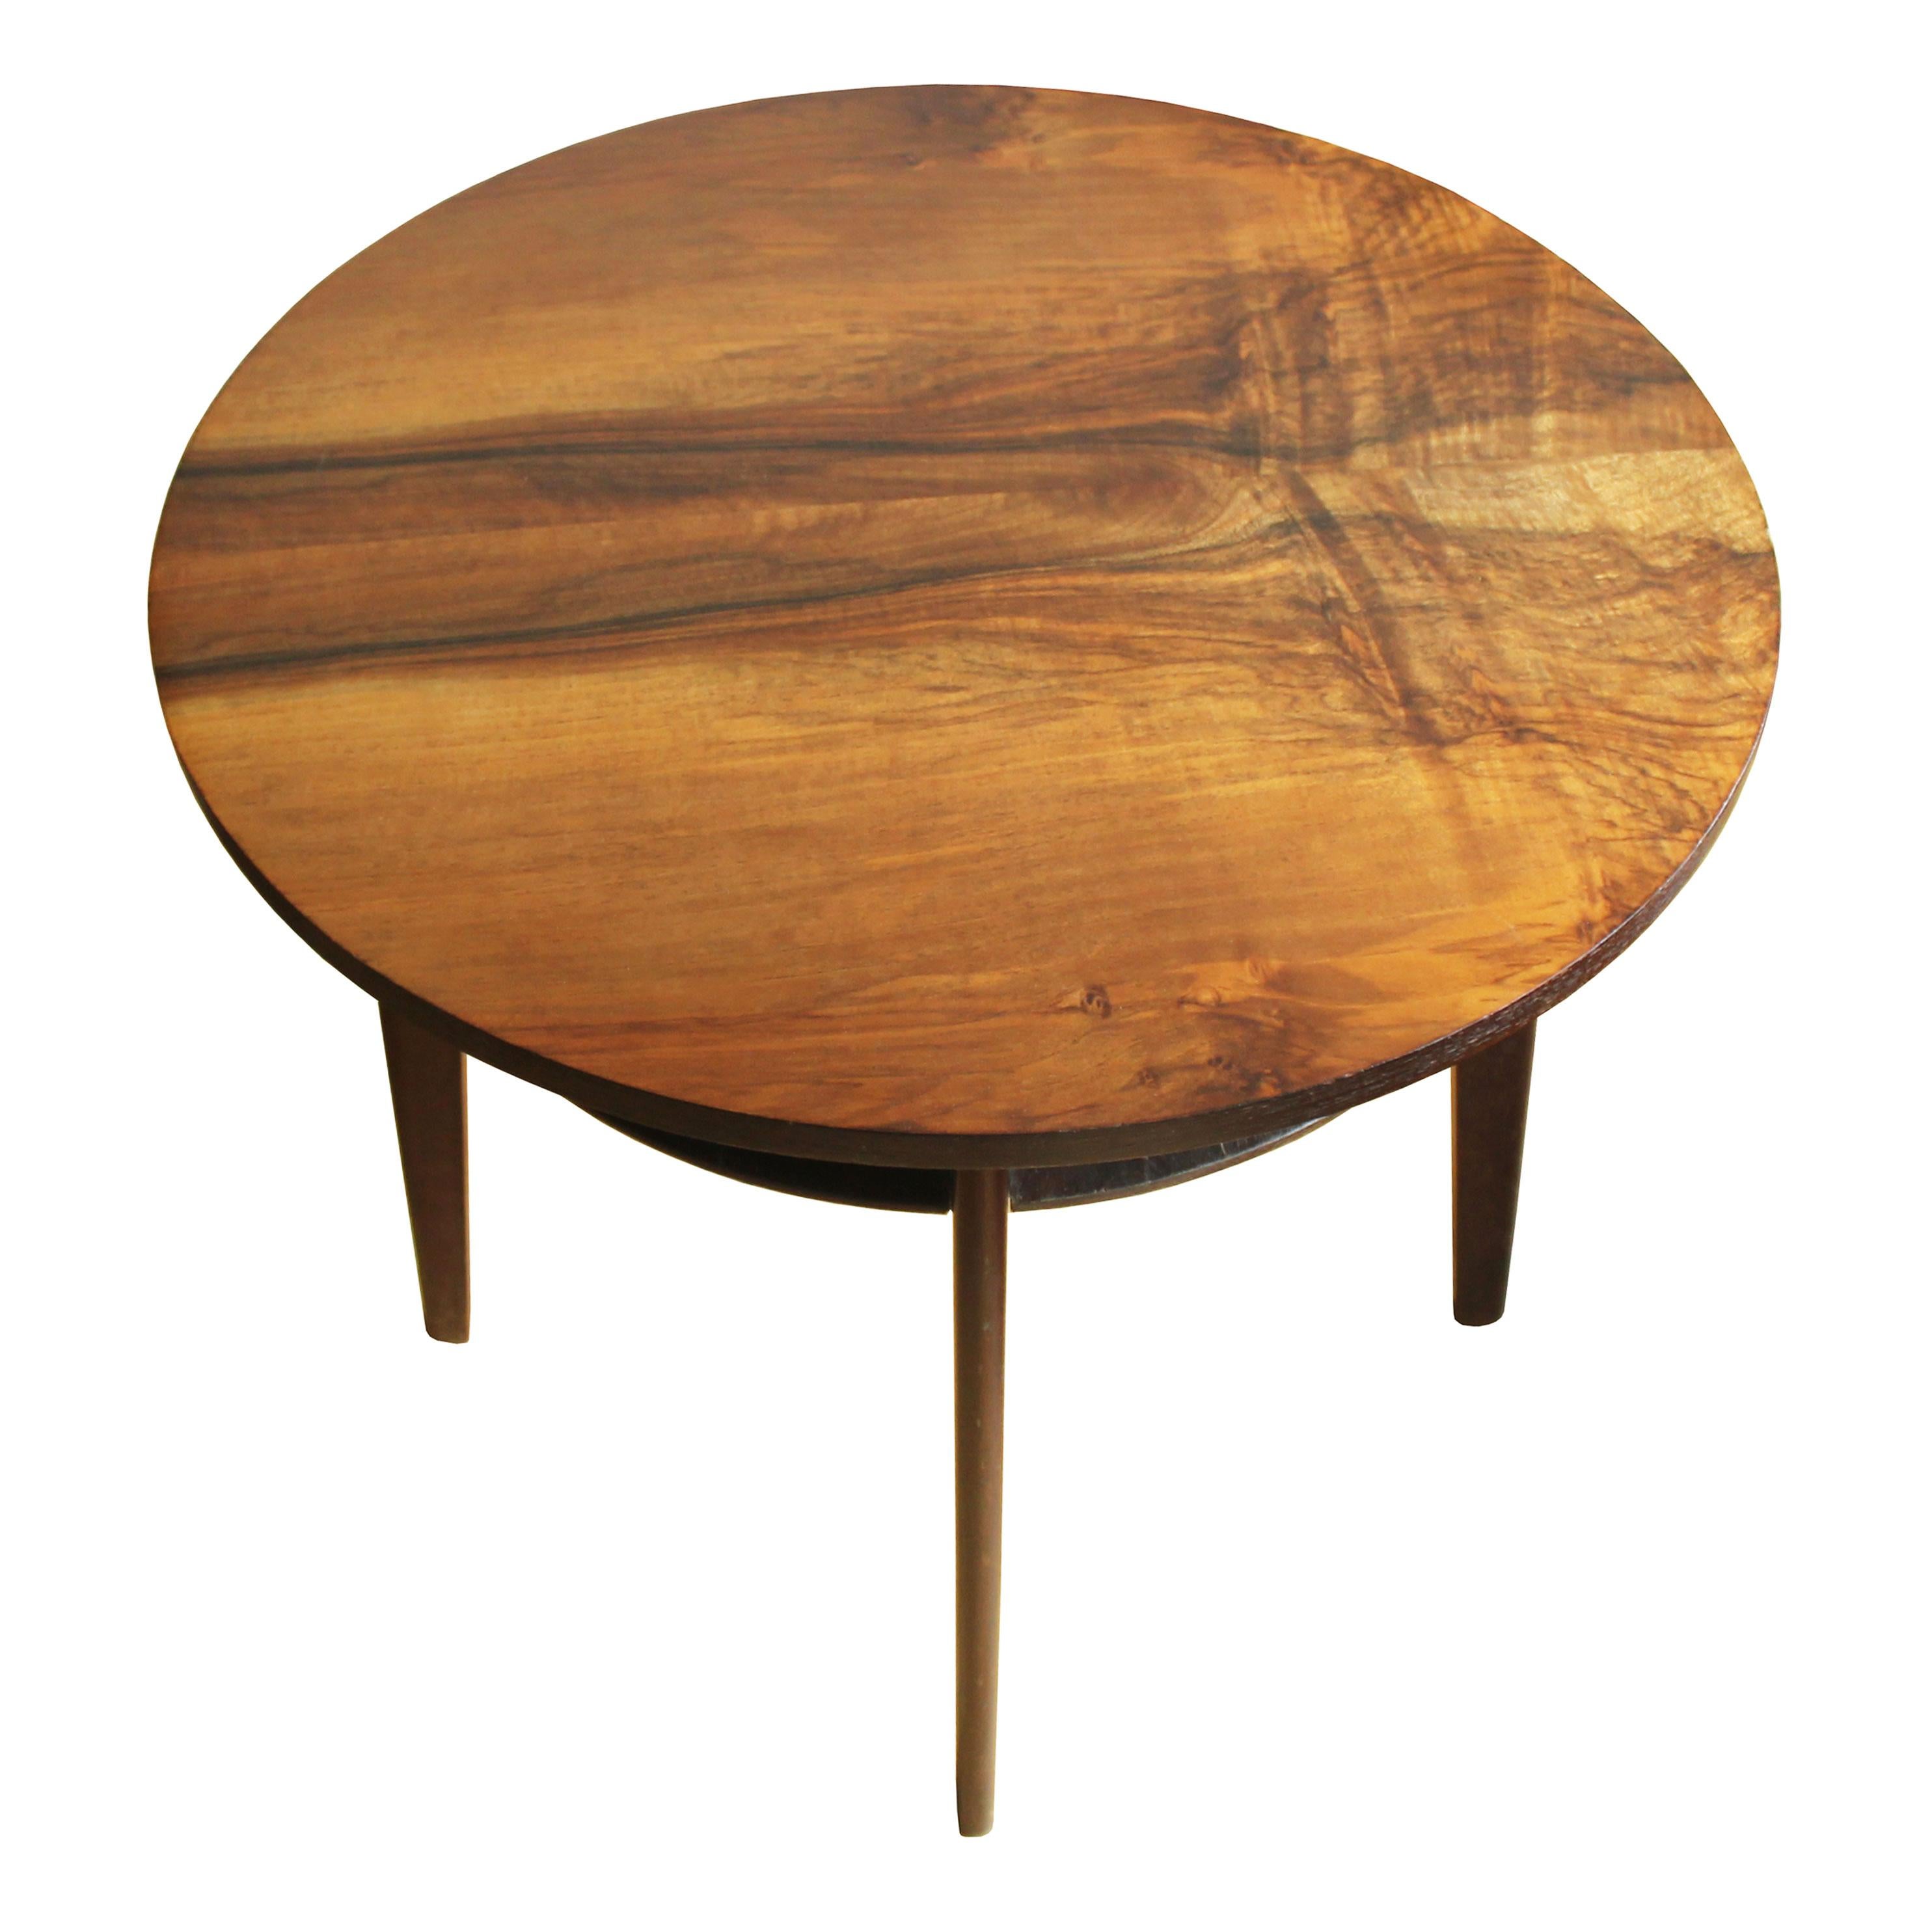 This round coffee table was designed and produced in 1960’s Czechoslovakia. It consists of four tampered legs, a circular tabletop with striking walnut veneer texture and another round thin beechwood layer underneath the main tabletop. At the time,